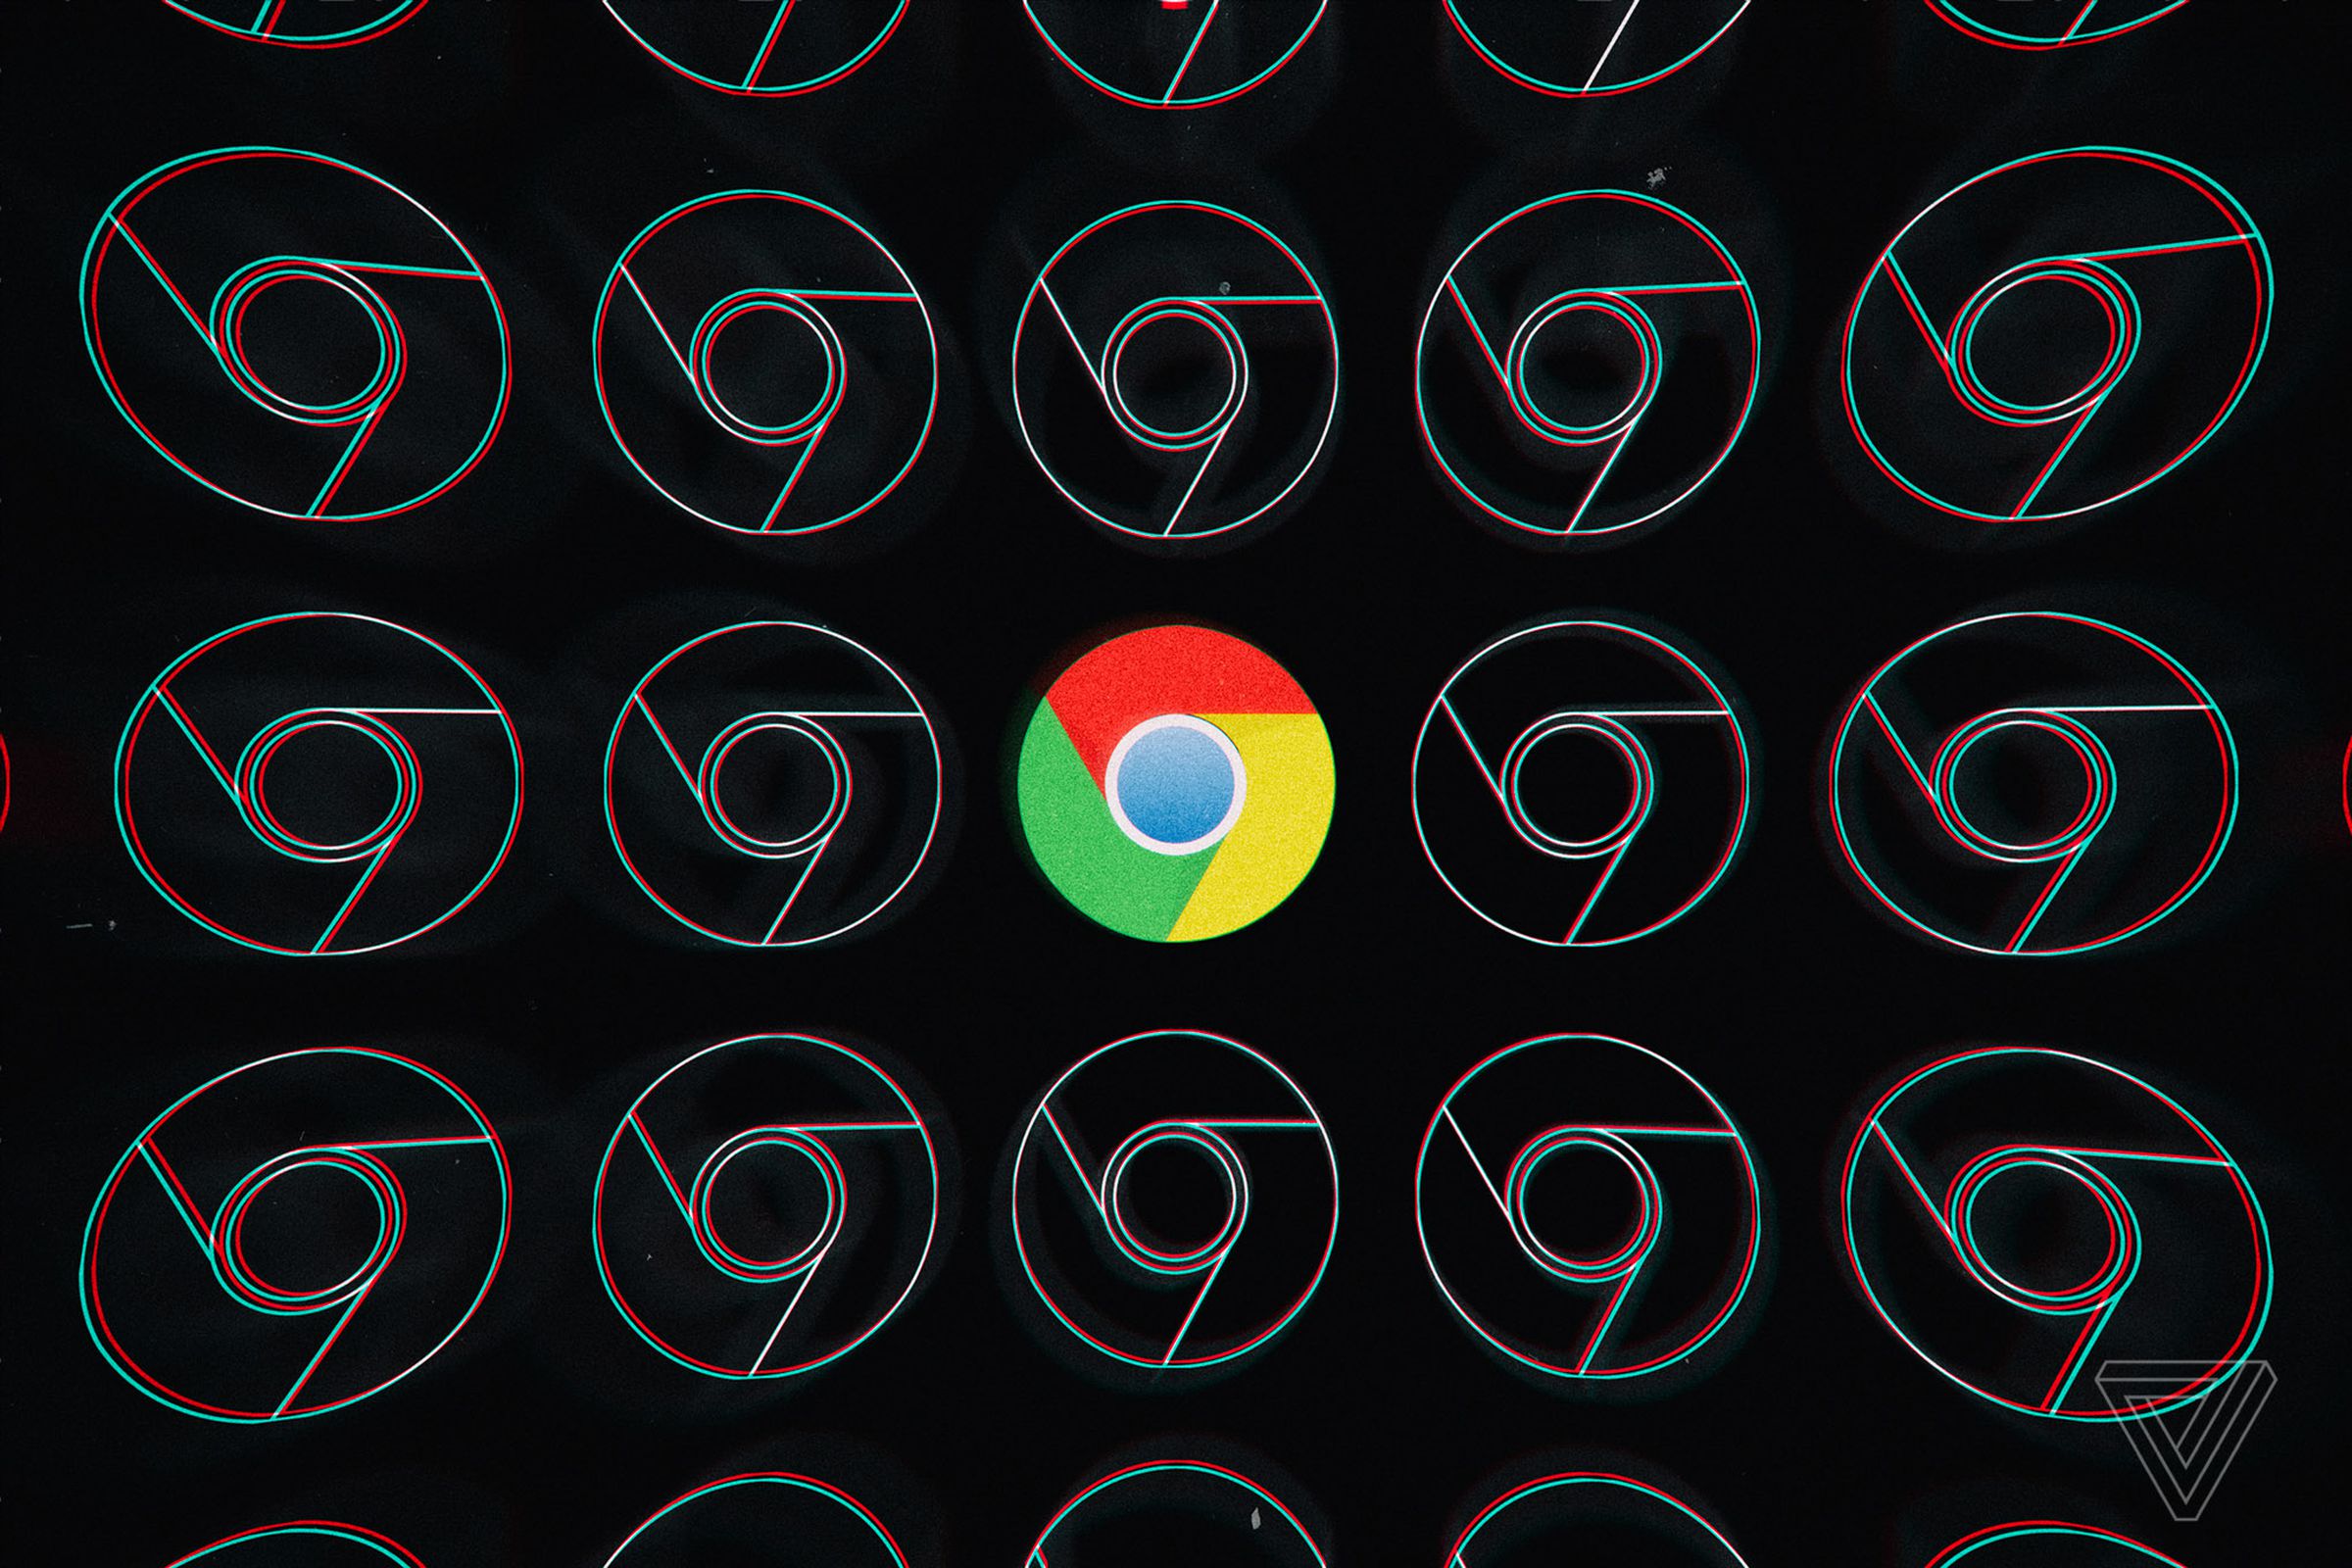 Stock imagery of the Chrome logo.